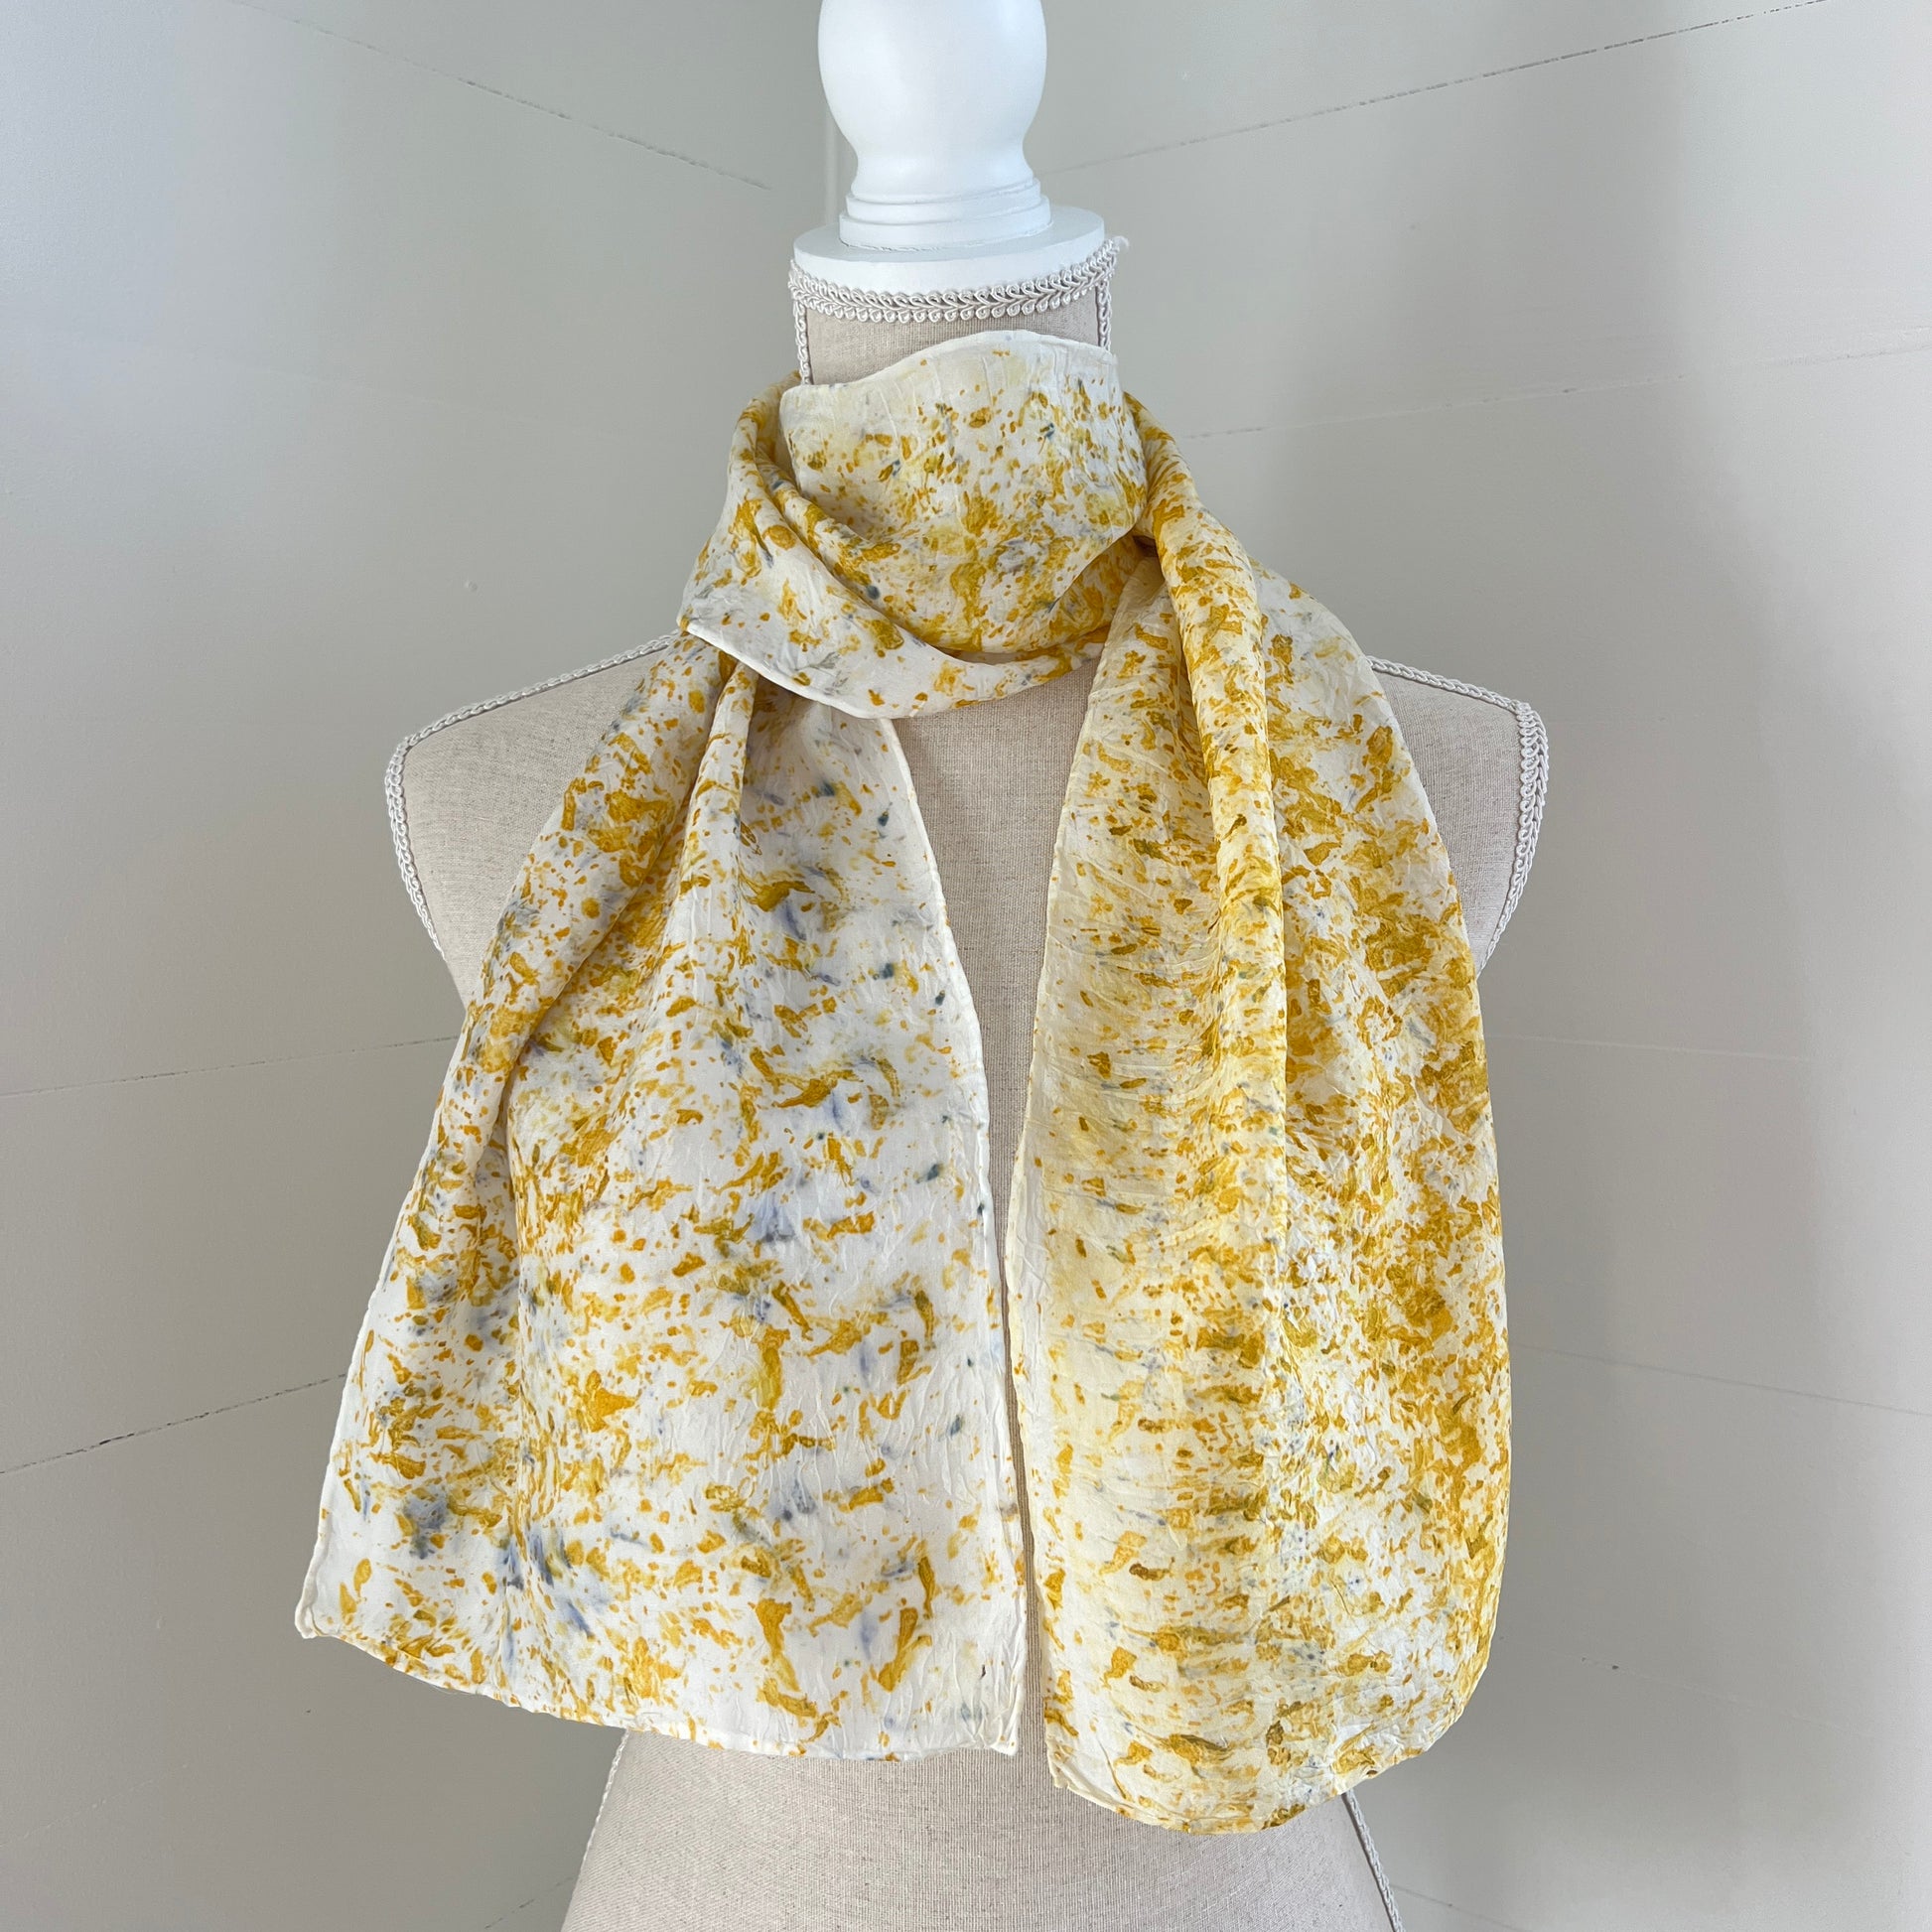 "Holly" Marigold/Hint of Bachelor Buttons Scarf 1818 Farms   